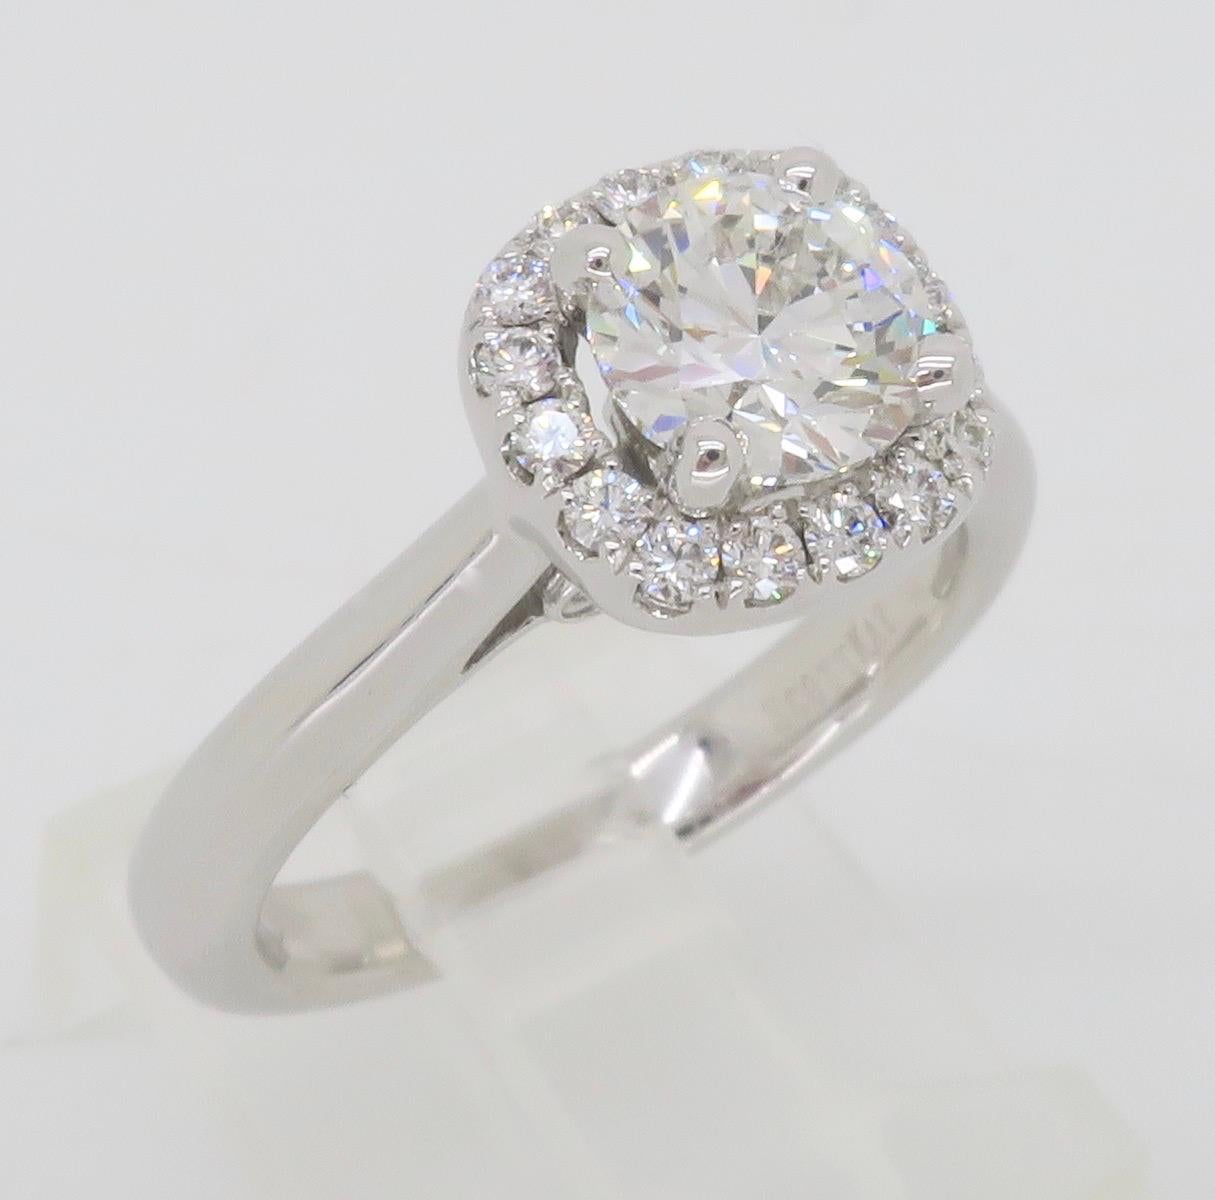 GIA Certified Round Brilliant Cut Diamond in a Stunning Scott Kay Halo Setting  For Sale 6